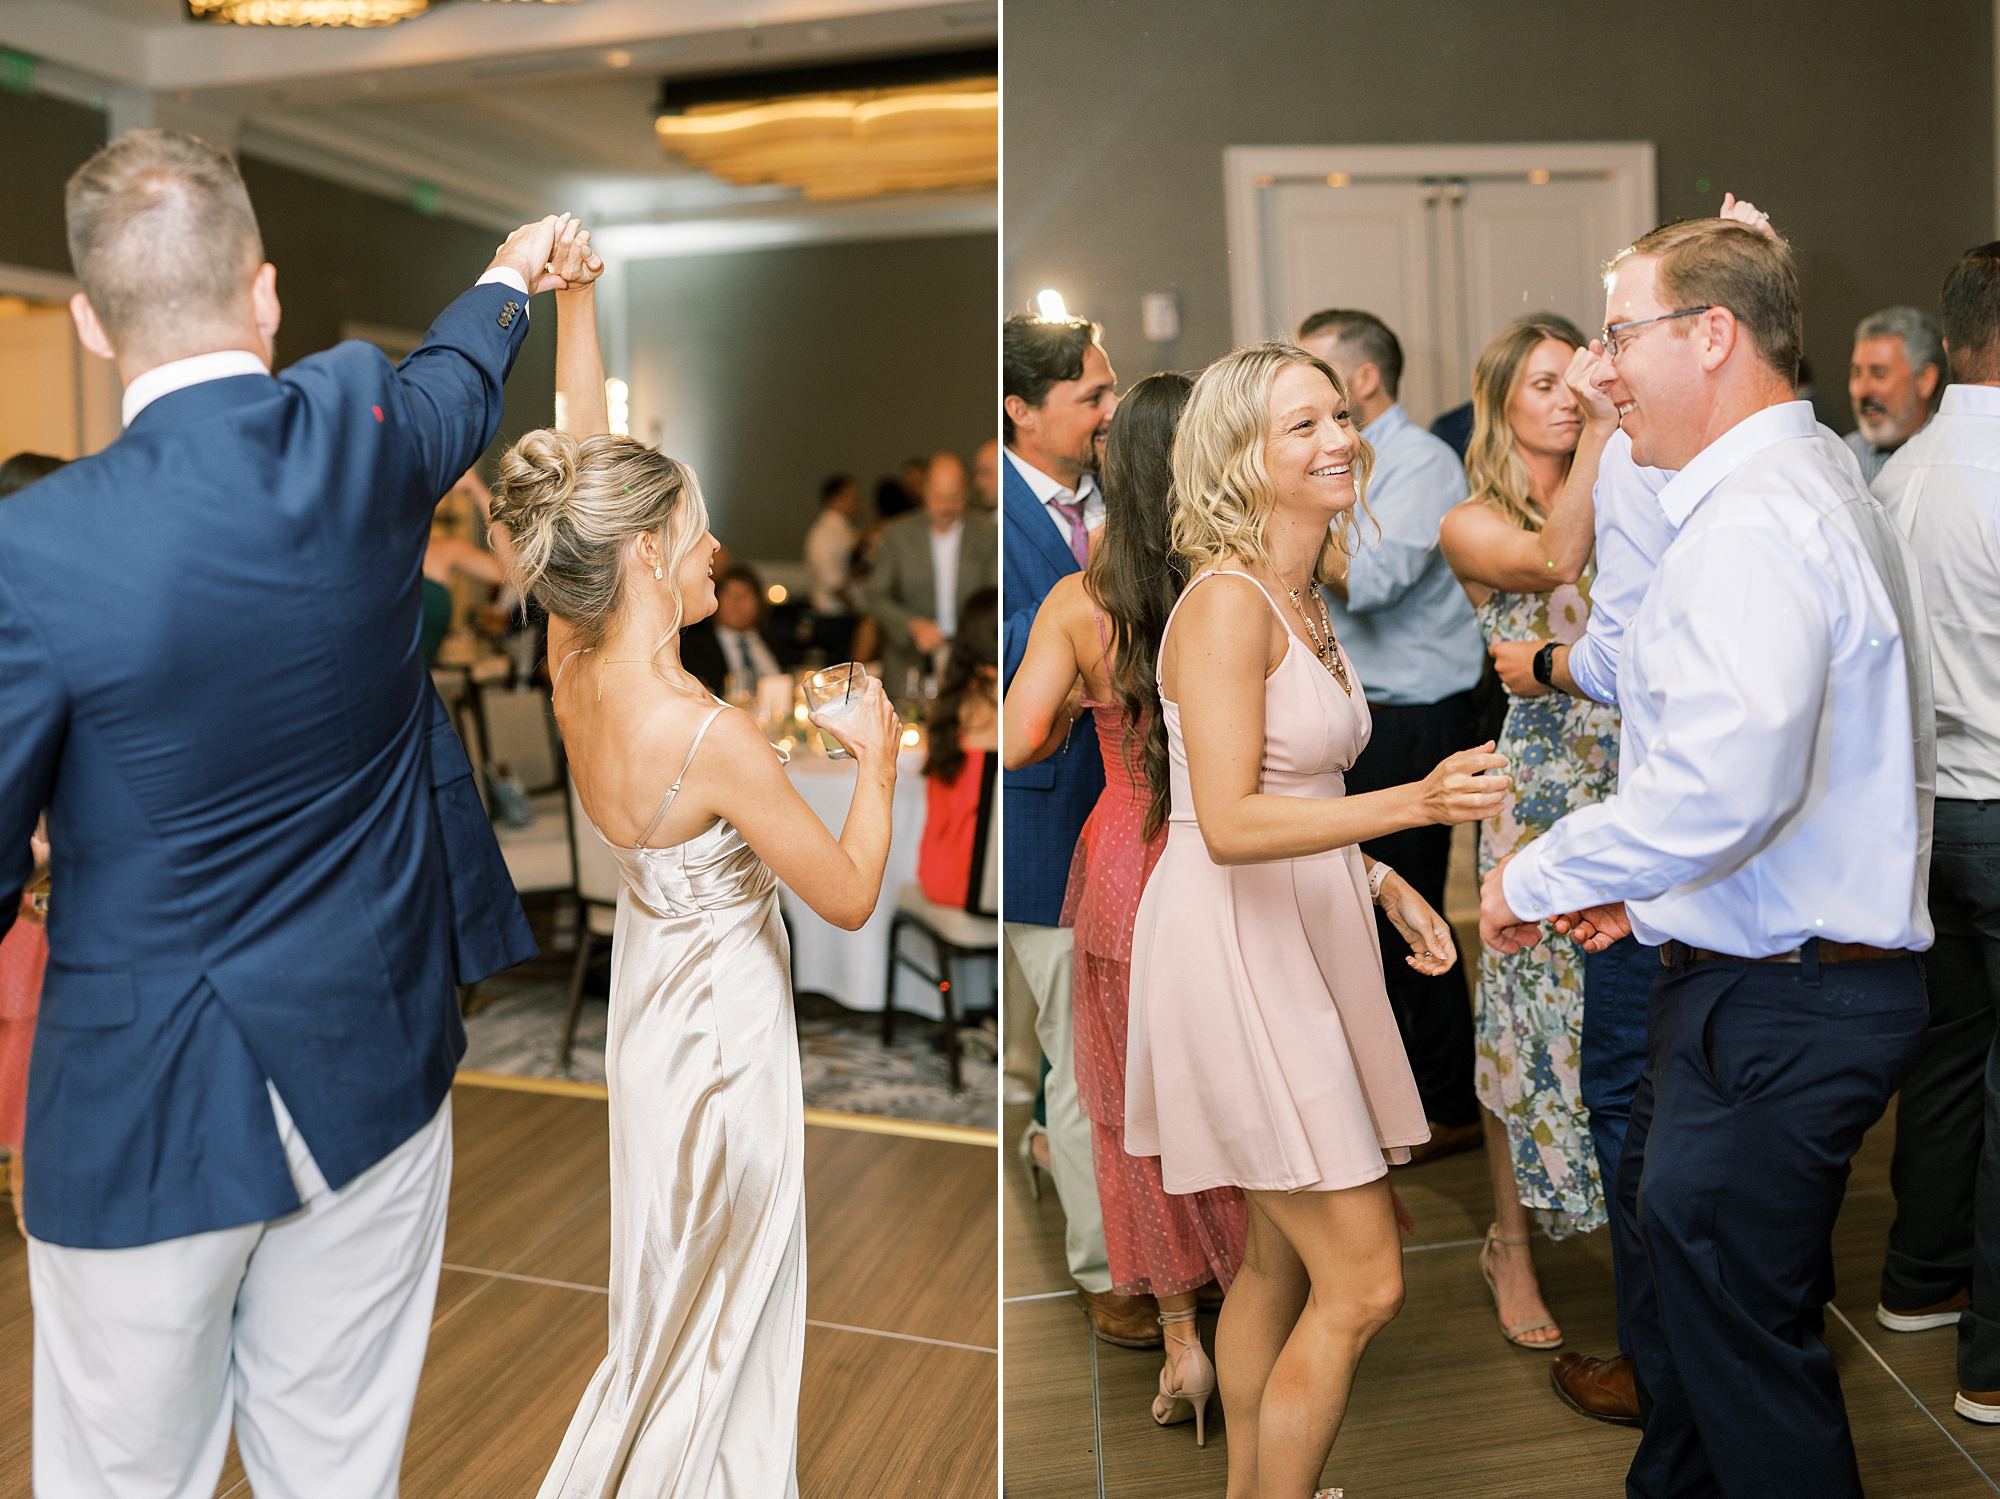 guests dance and celebrate newlyweds